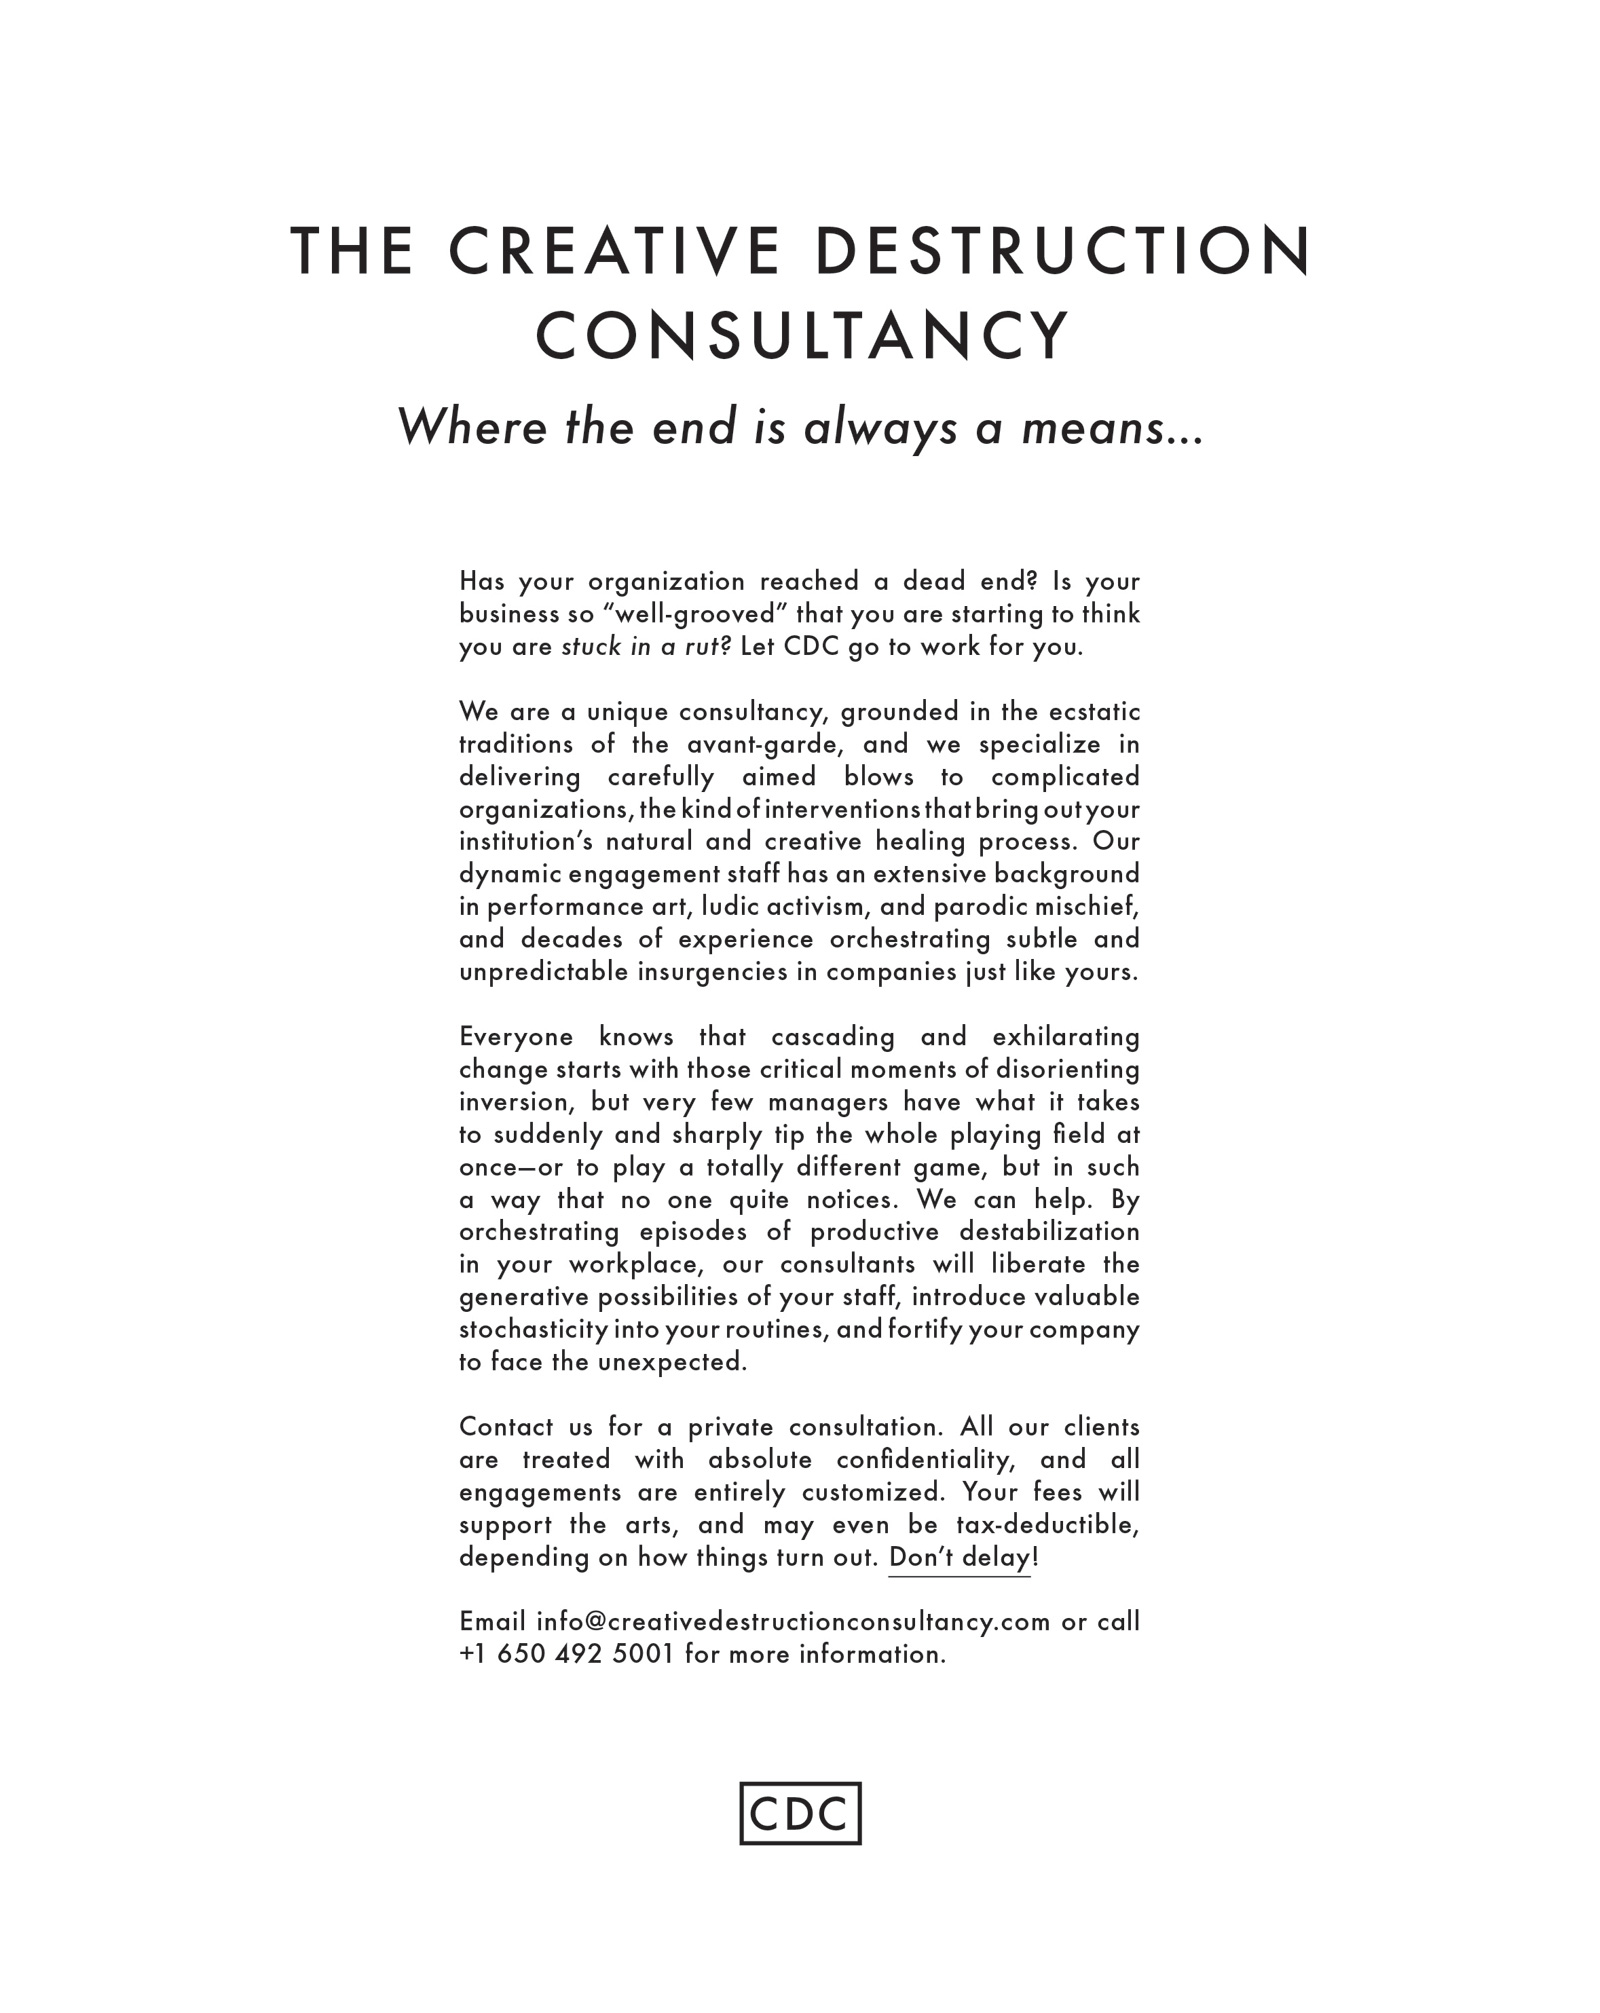 An advertisement for the Creative Destruction Company, a faux consultancy business grounded “in the ecstatic traditions of the avant garde.”